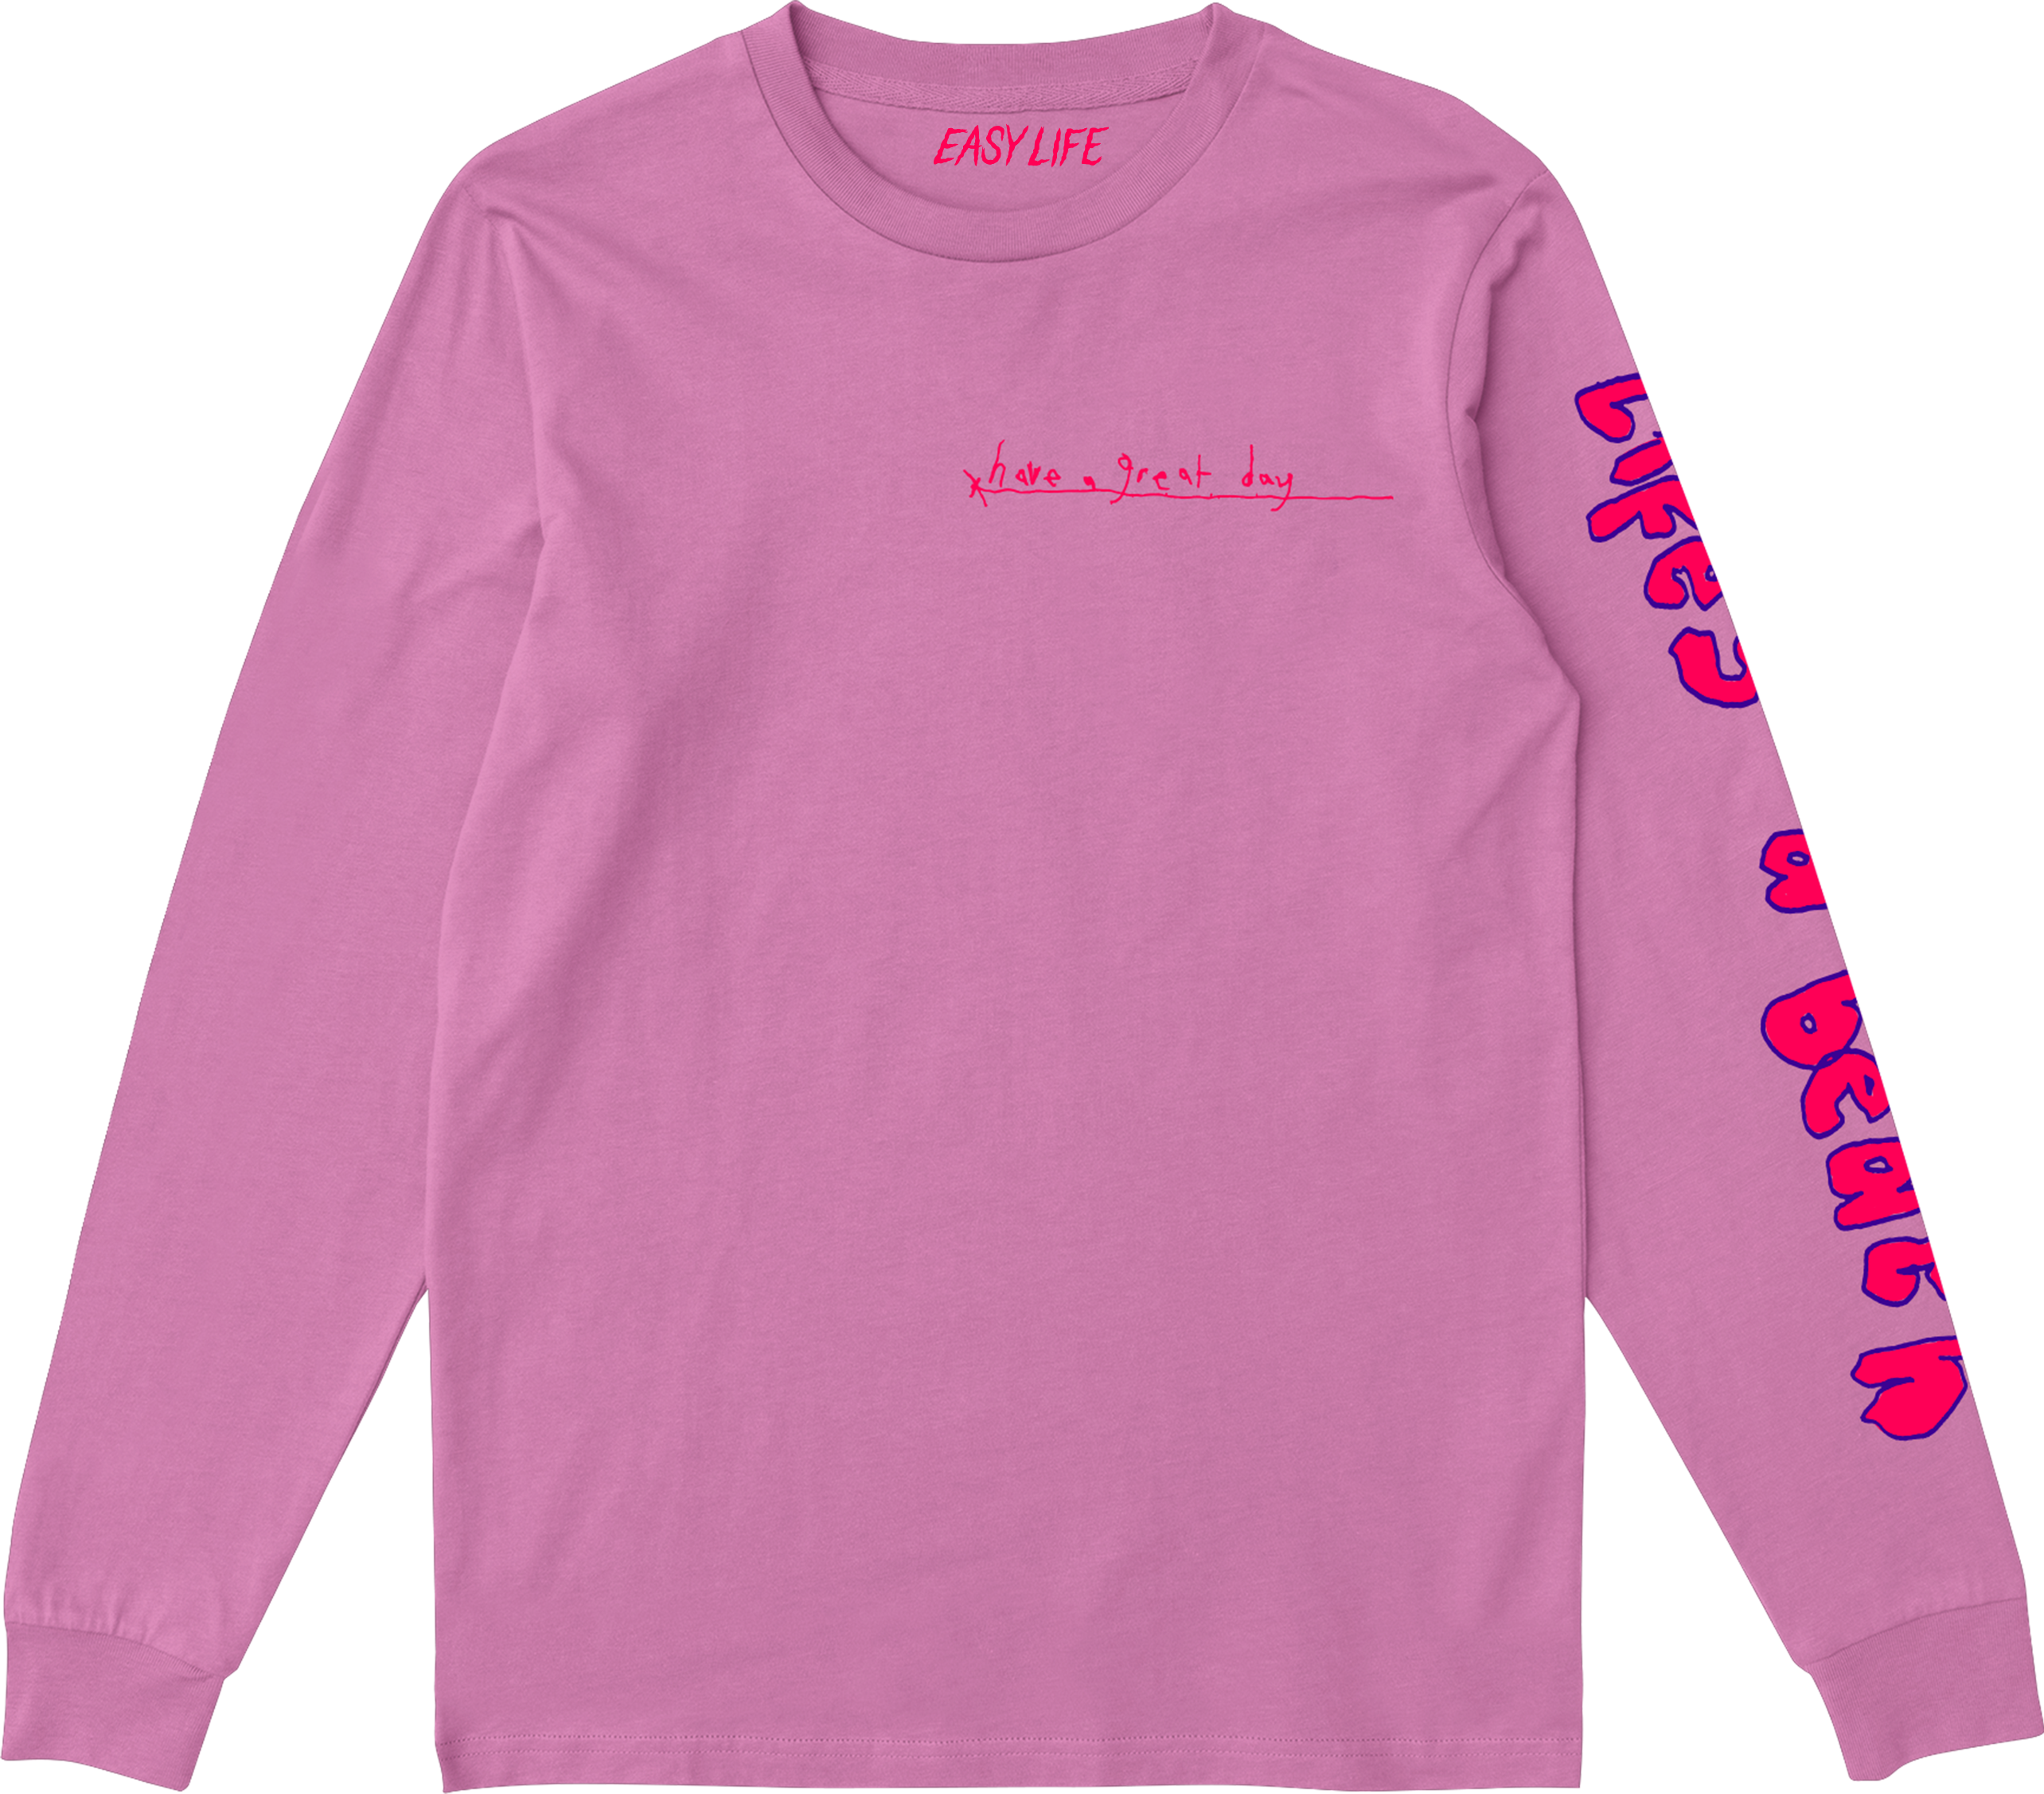 easy life - life's a beach: have a great day longsleeve 